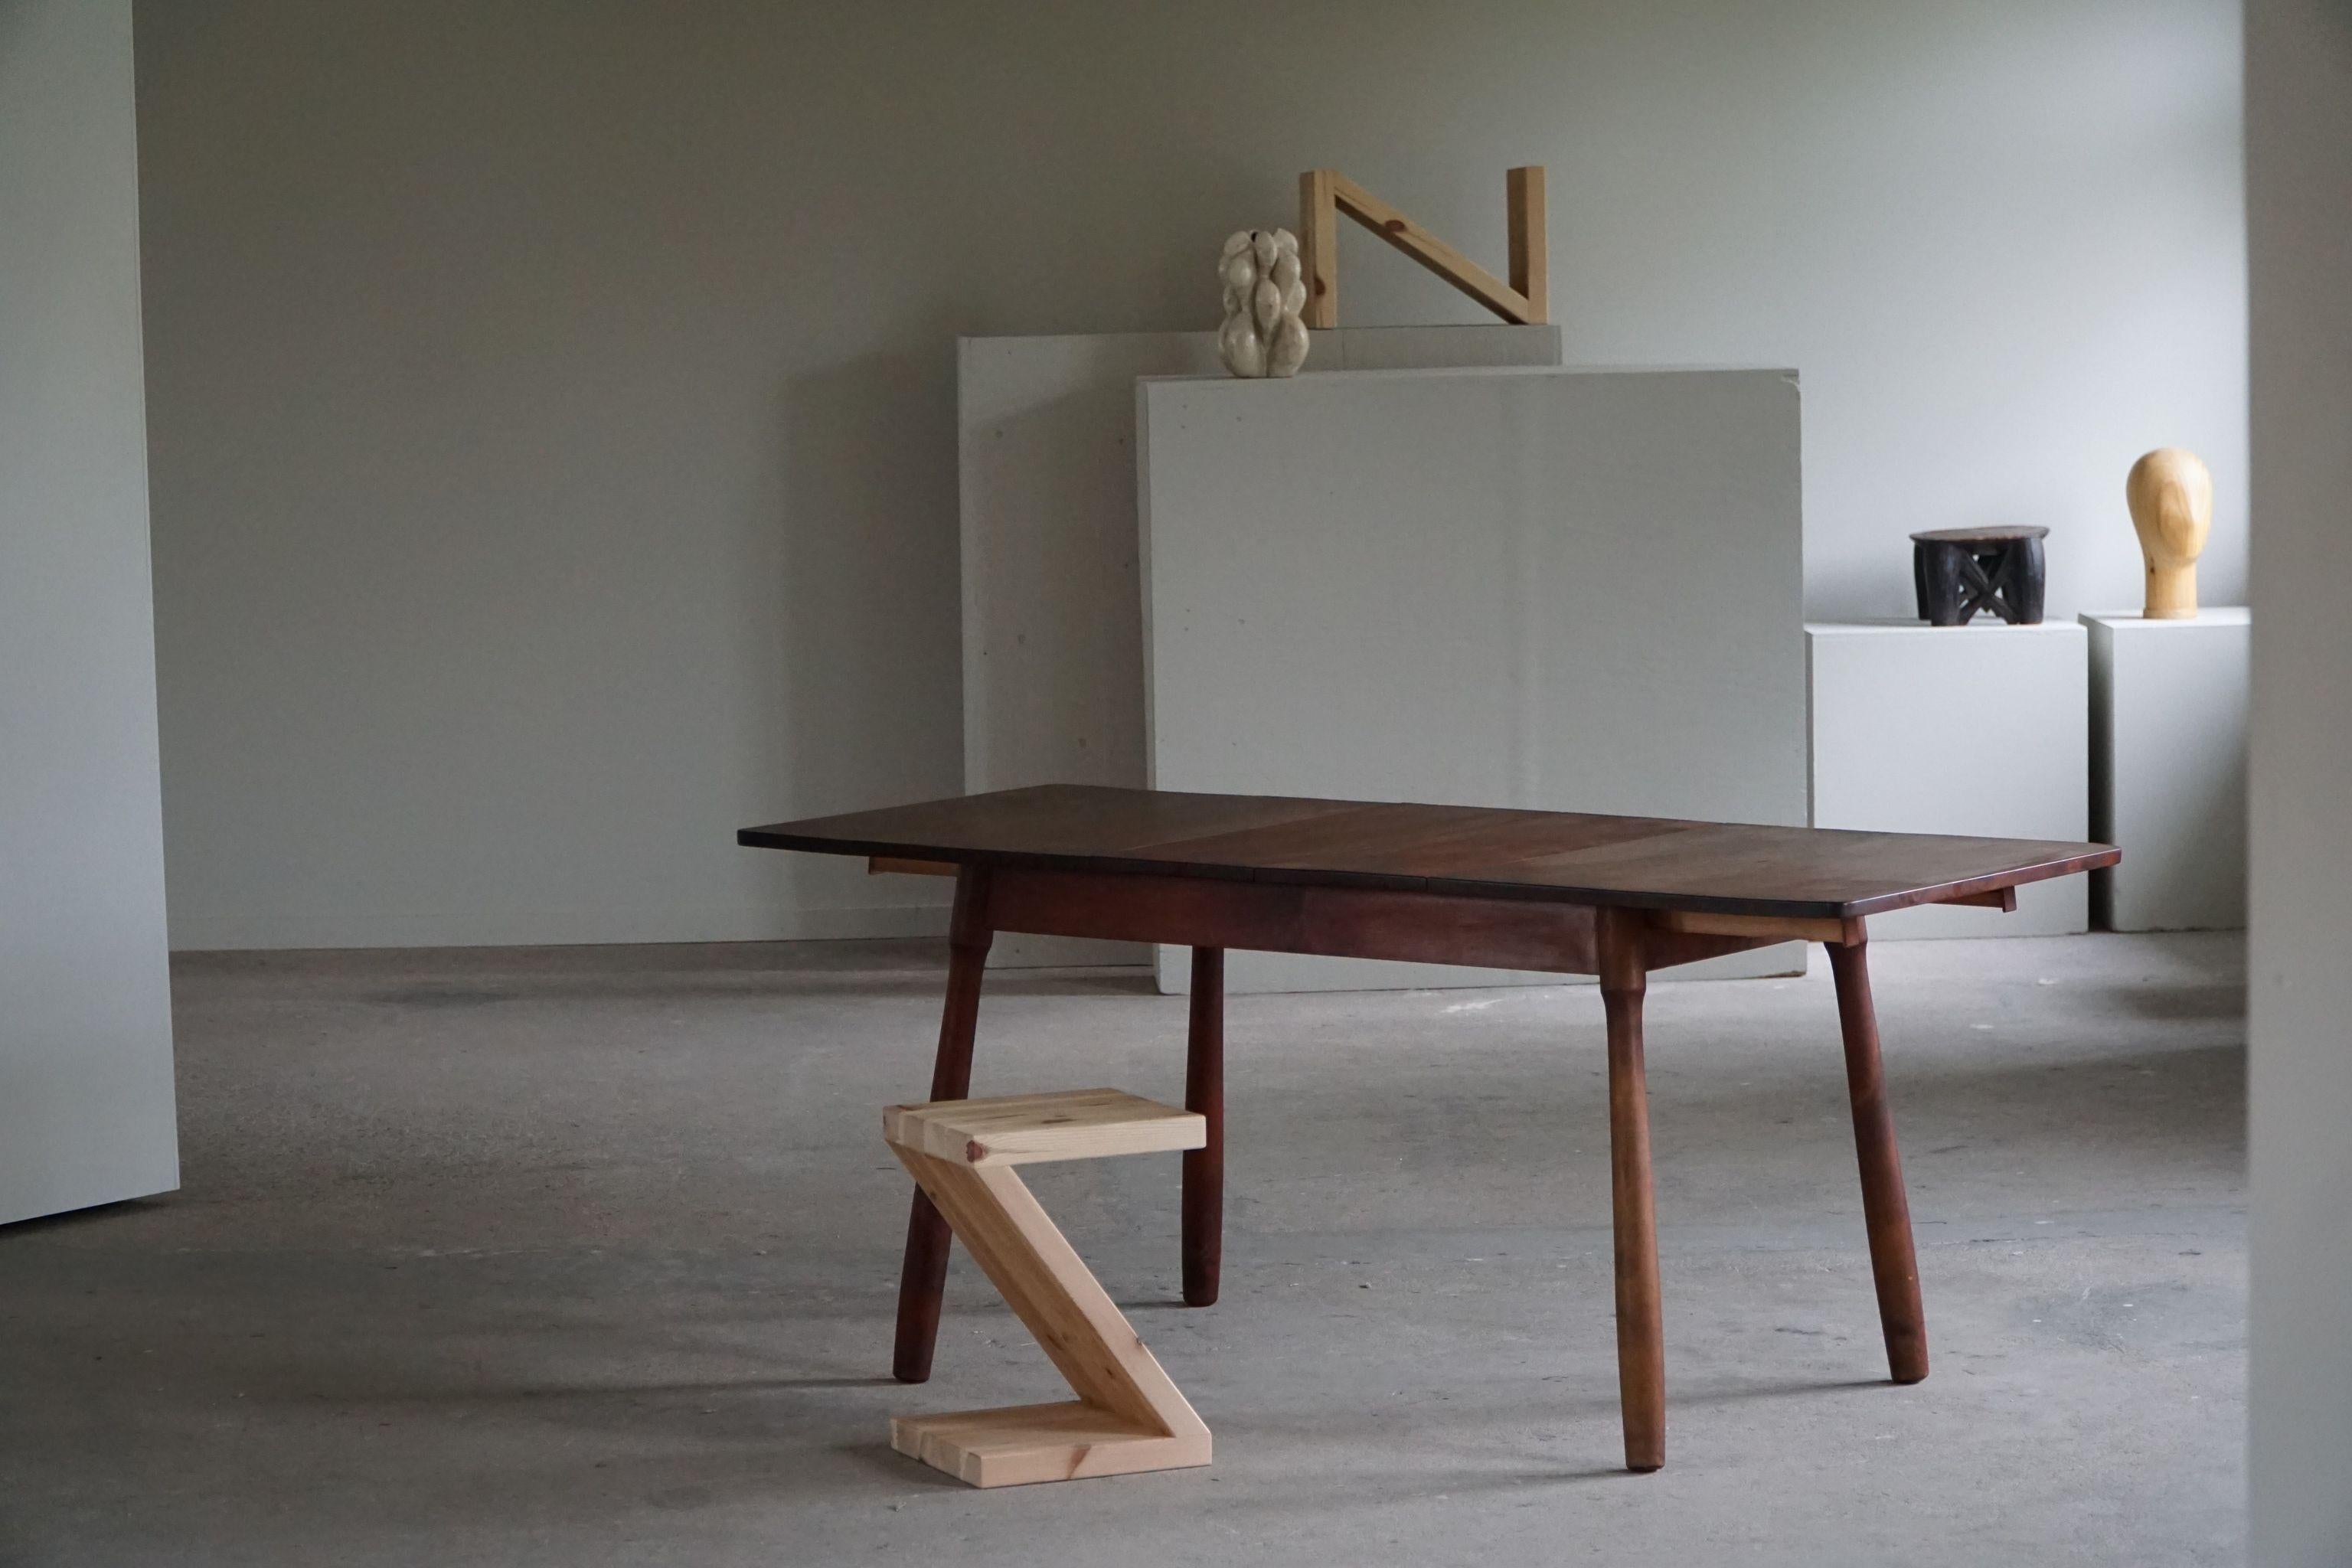 An exclusive modern dining table / desk in solid beech with fine club shaped legs. 
Attributed to Danish designer Arnold Madsen with a strong reference to hes iconic 